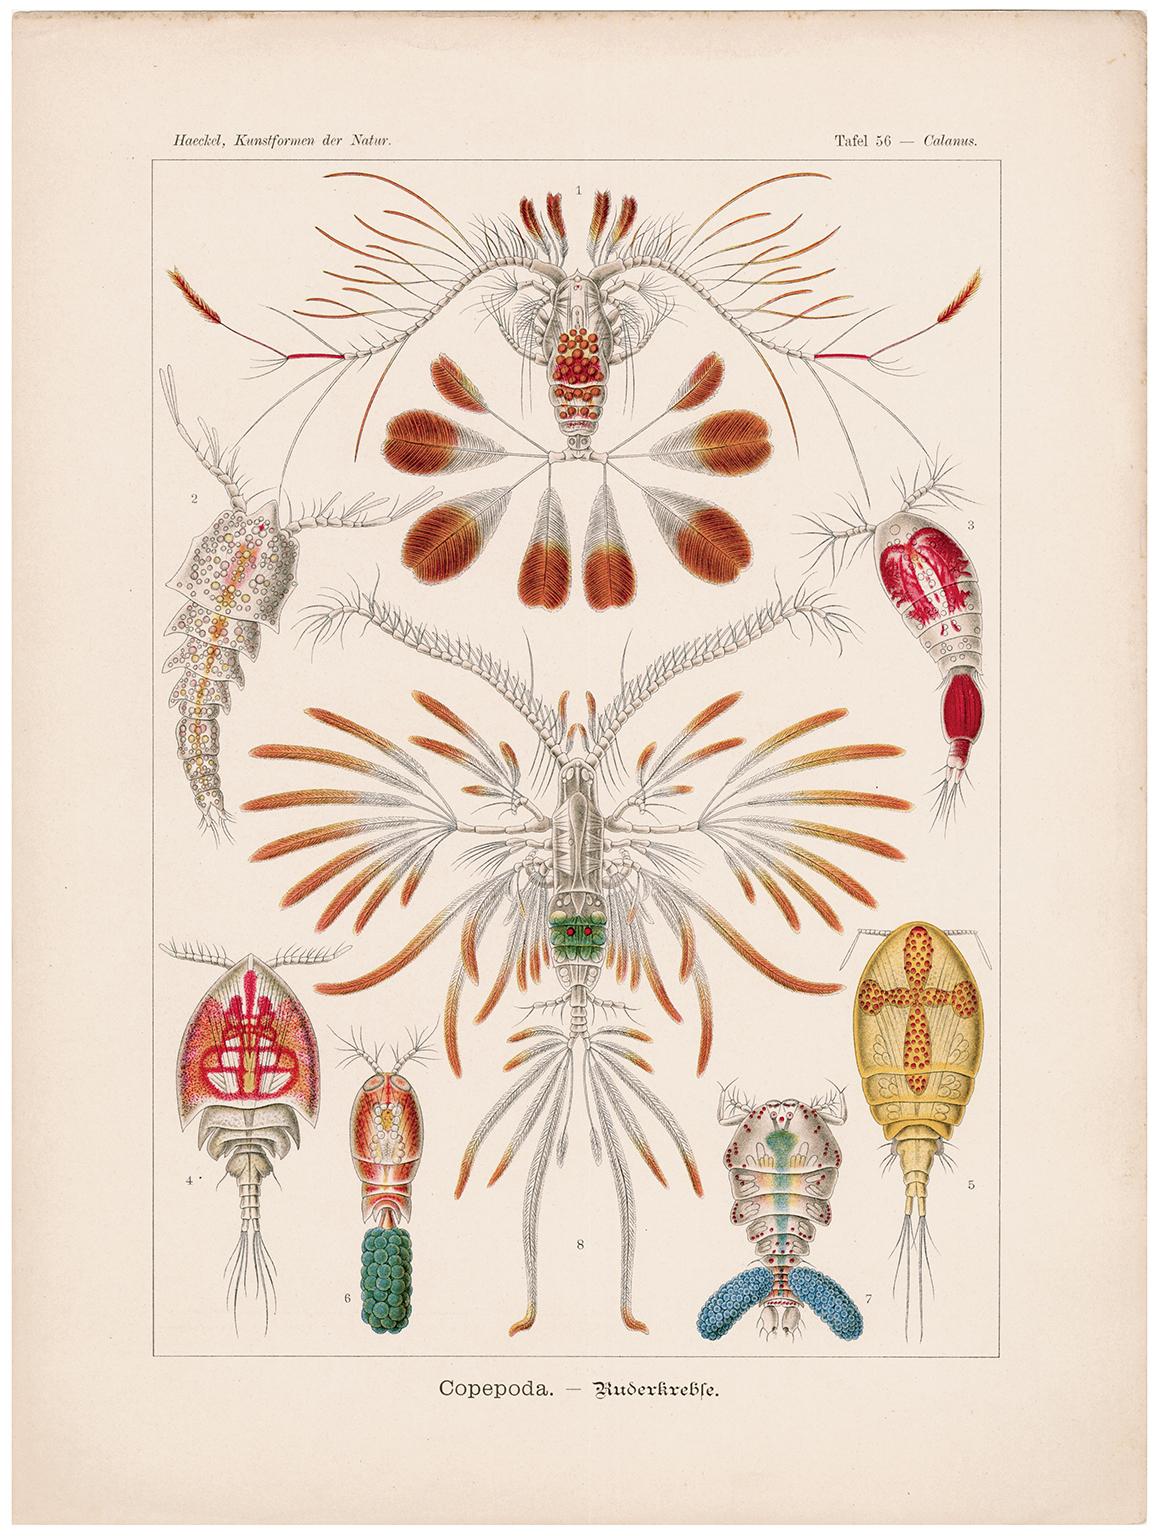 Art Forms in Nature (Plate 56 - Calanus) — 1899 Celebration of Natural forms - Print by Ernst Haeckel